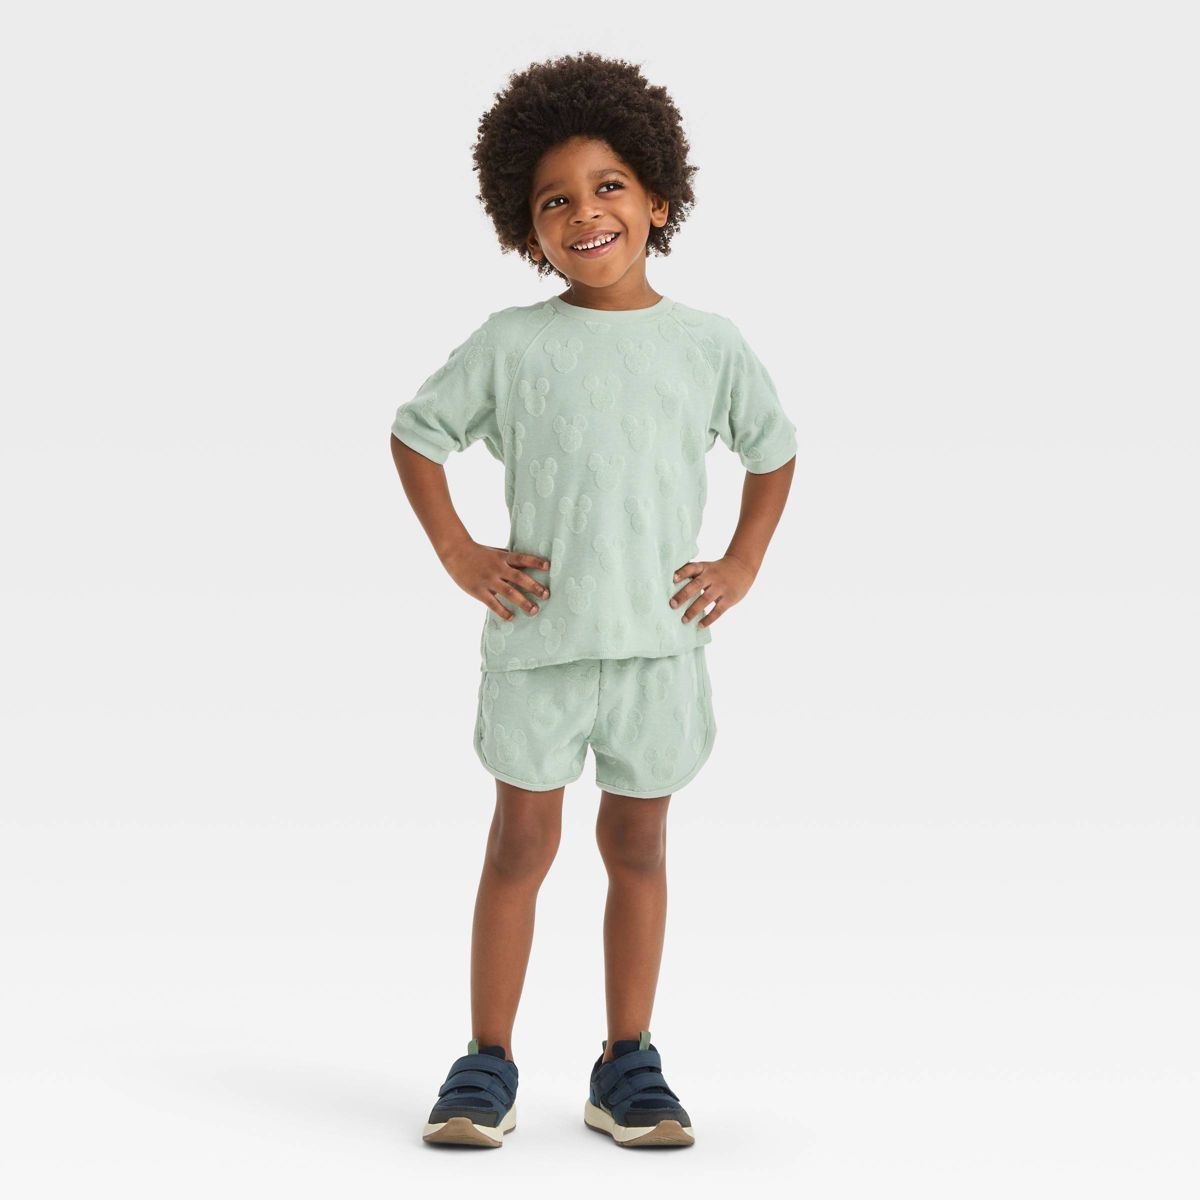 Toddler boy outfits, baby boy clothes | Target